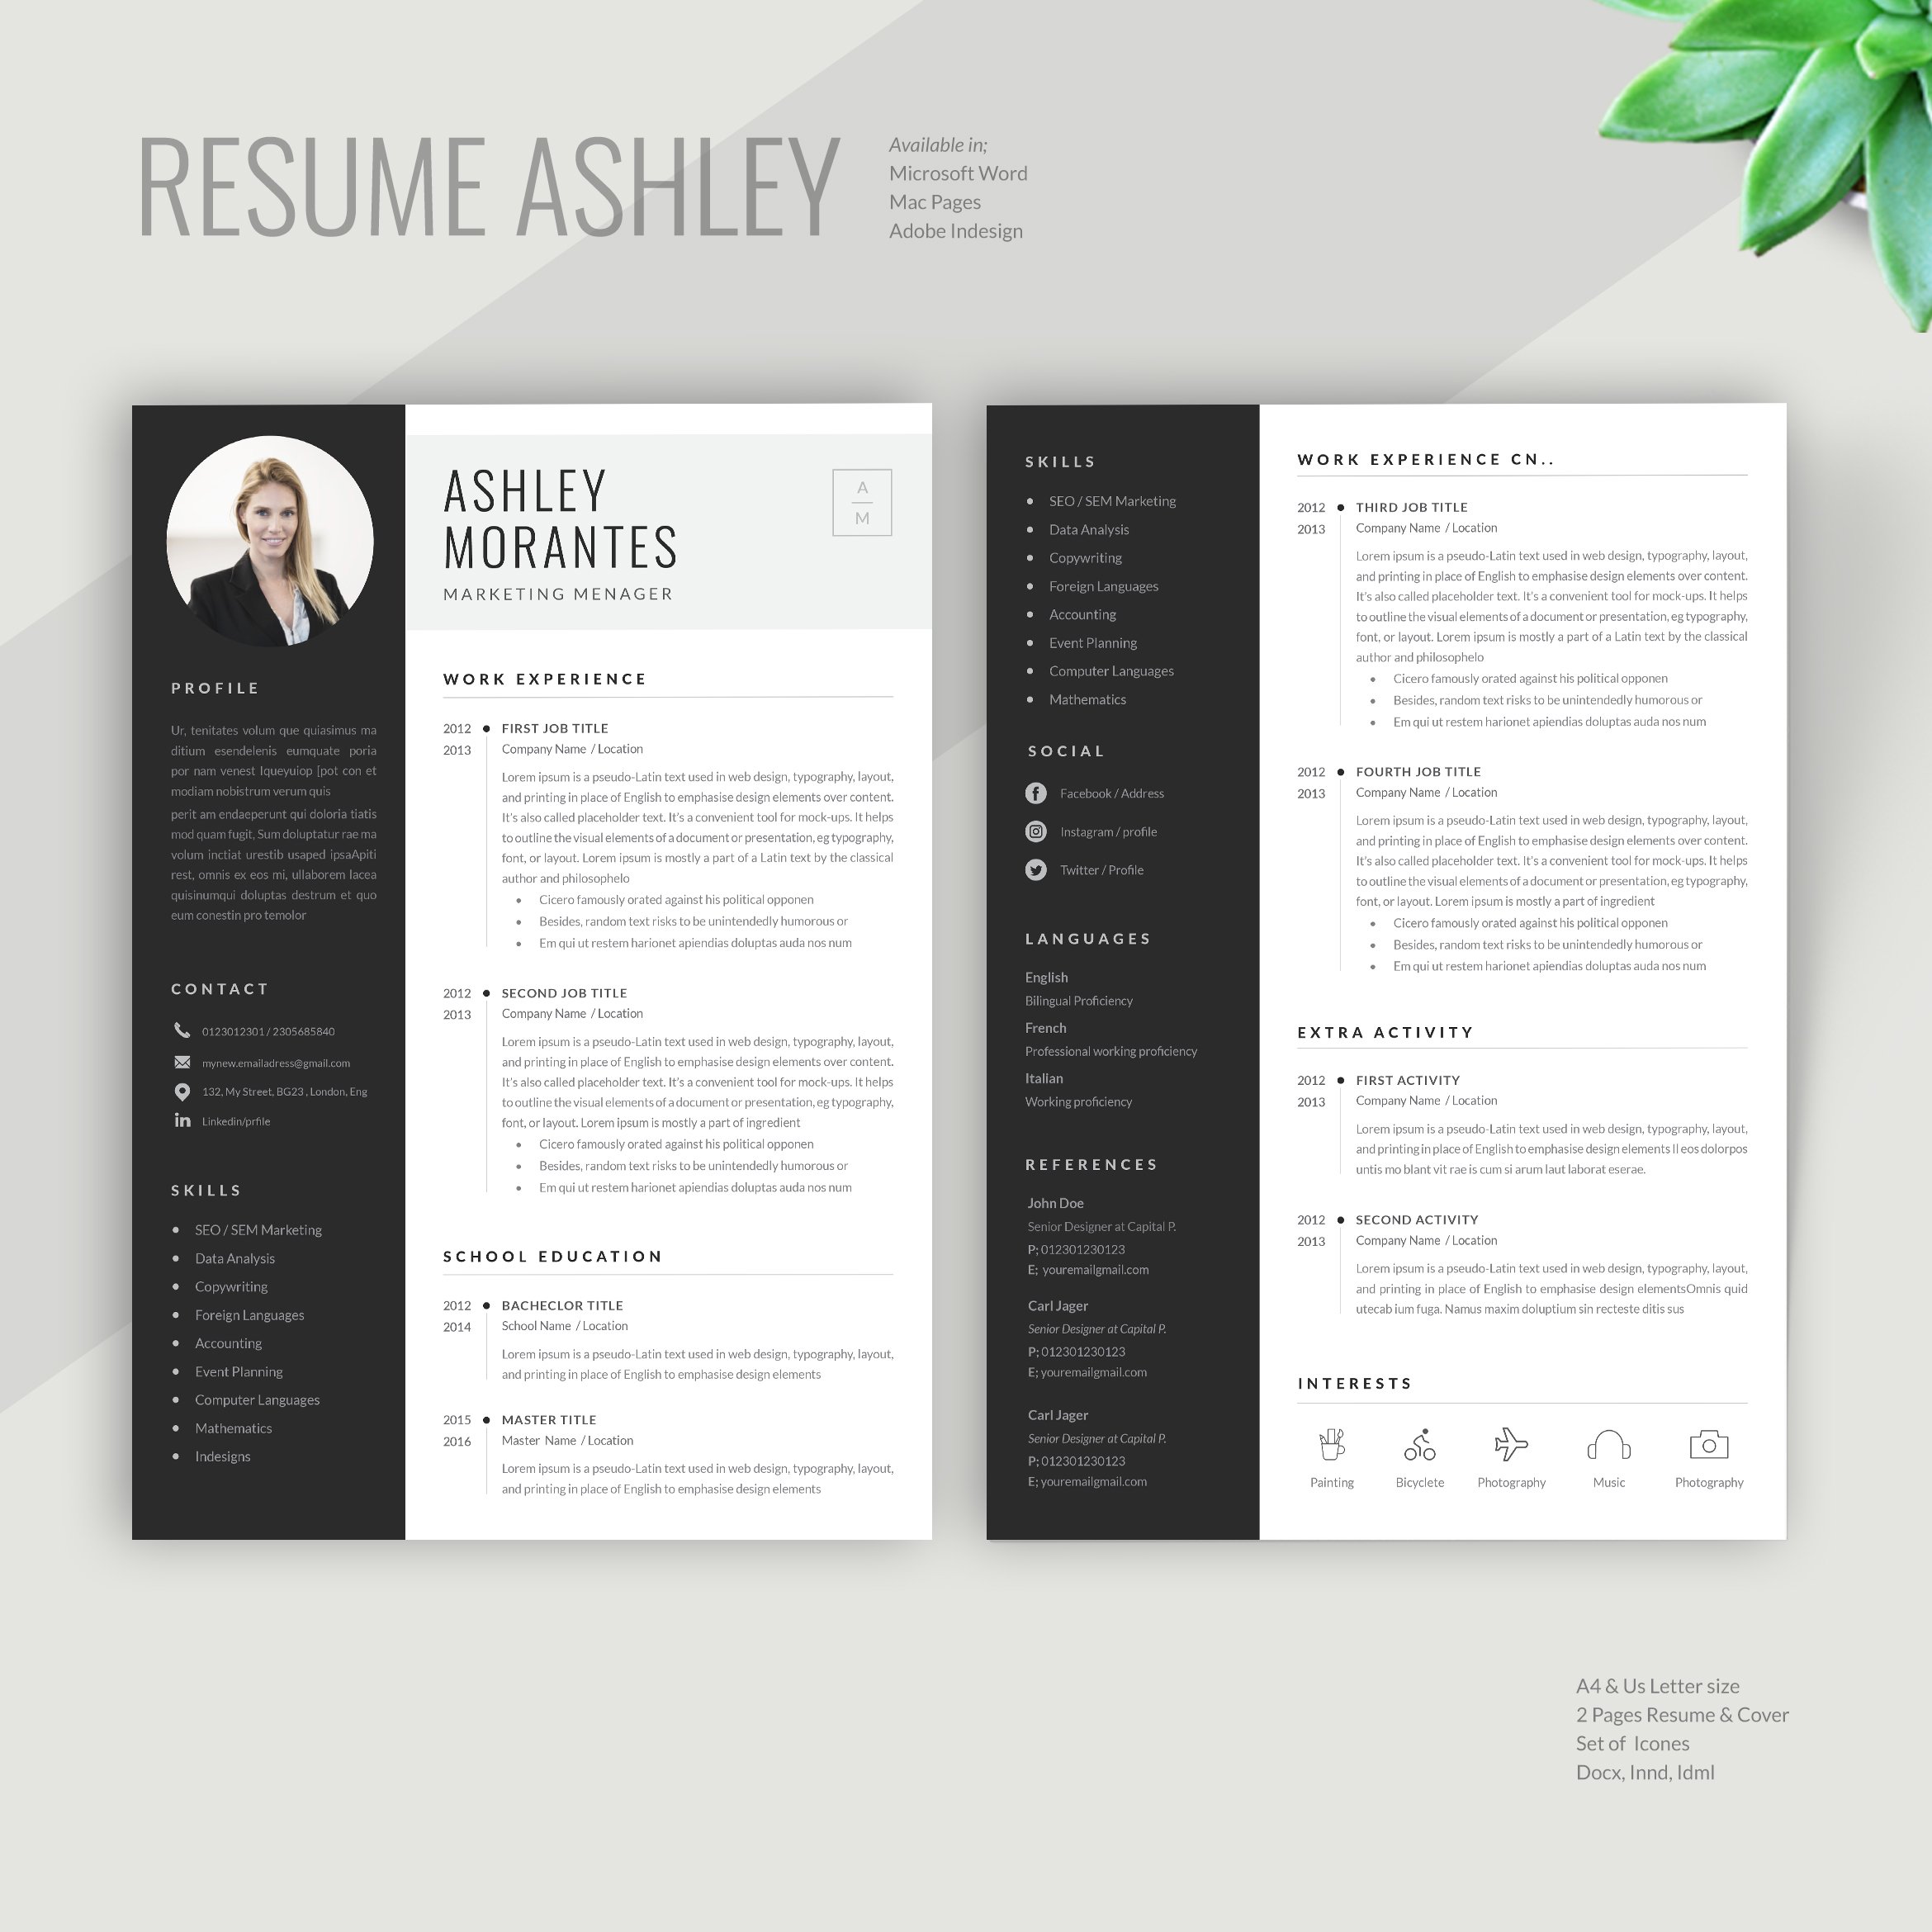 Resume Template Ashley preview image.